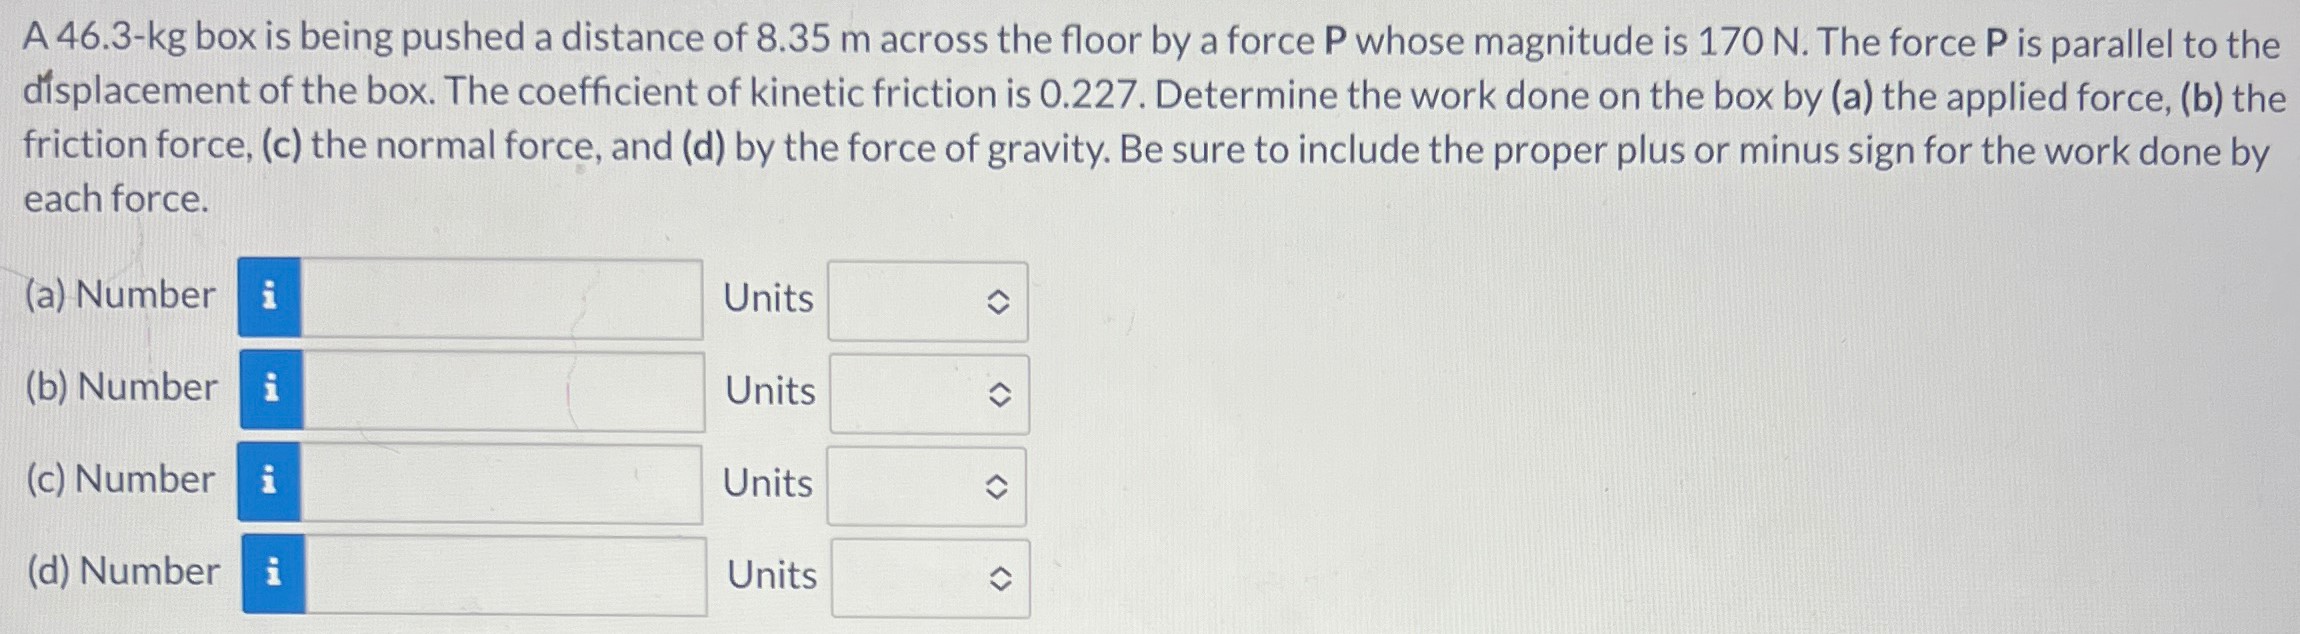 A 46.3-kg box is being pushed a distance of 8.35 m across the floor by a force P whose magnitude is 170 N. The force P is parallel to the displacement of the box. The coefficient of kinetic friction is 0.227 . Determine the work done on the box by (a) the applied force, (b) the friction force, (c) the normal force, and (d) by the force of gravity. Be sure to include the proper plus or minus sign for the work done by each force. (a) Number Units (b) Number Units (c) Number Units (d) Number Units